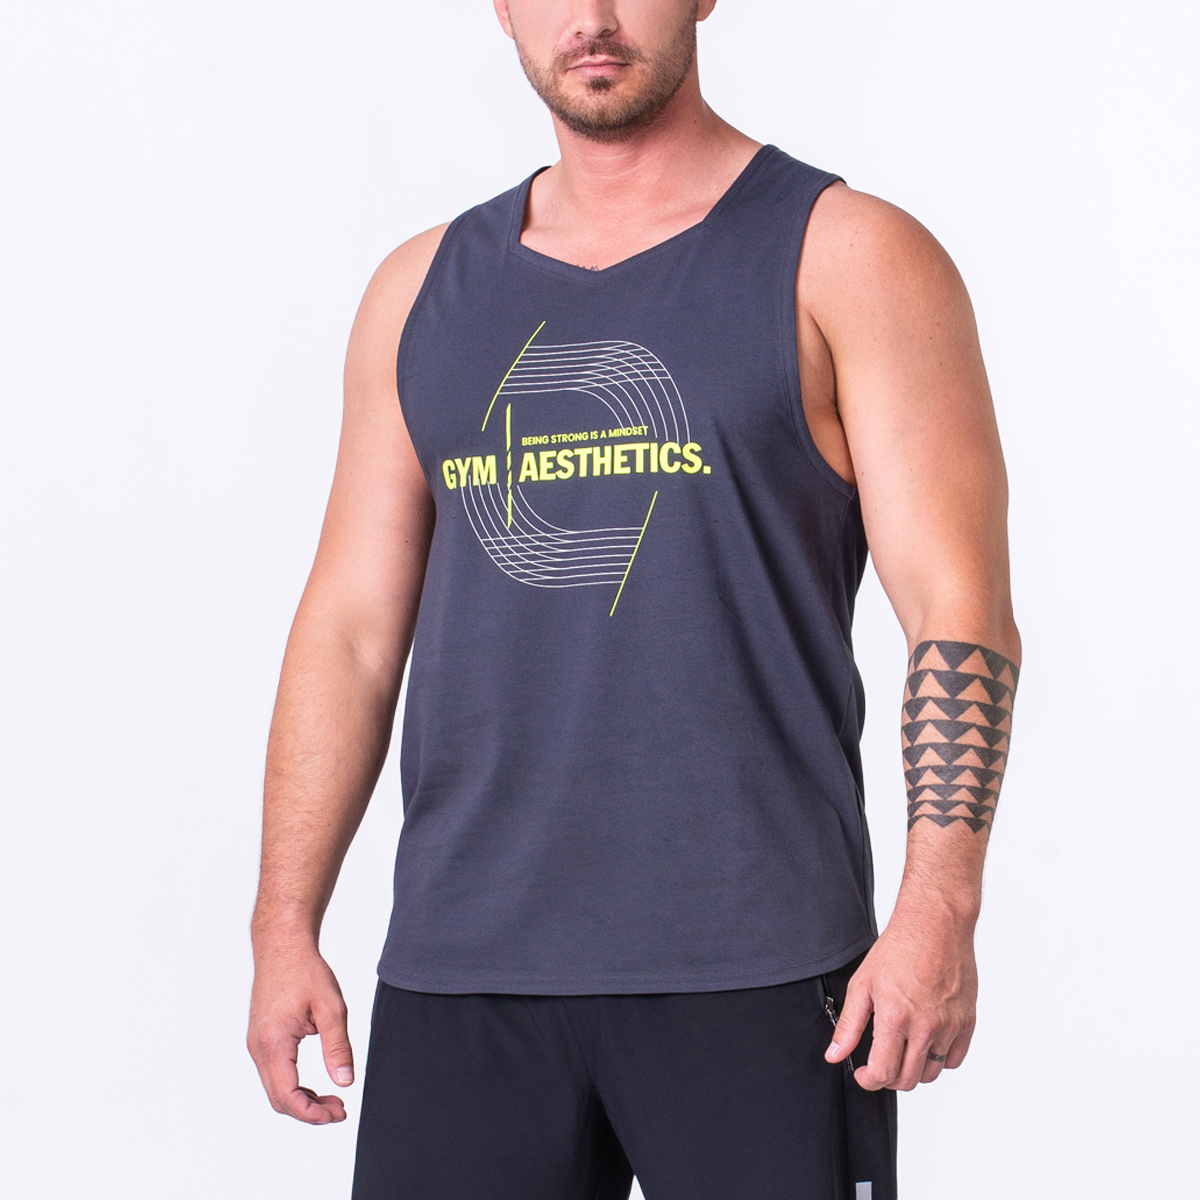 personal trainer clothing discounts